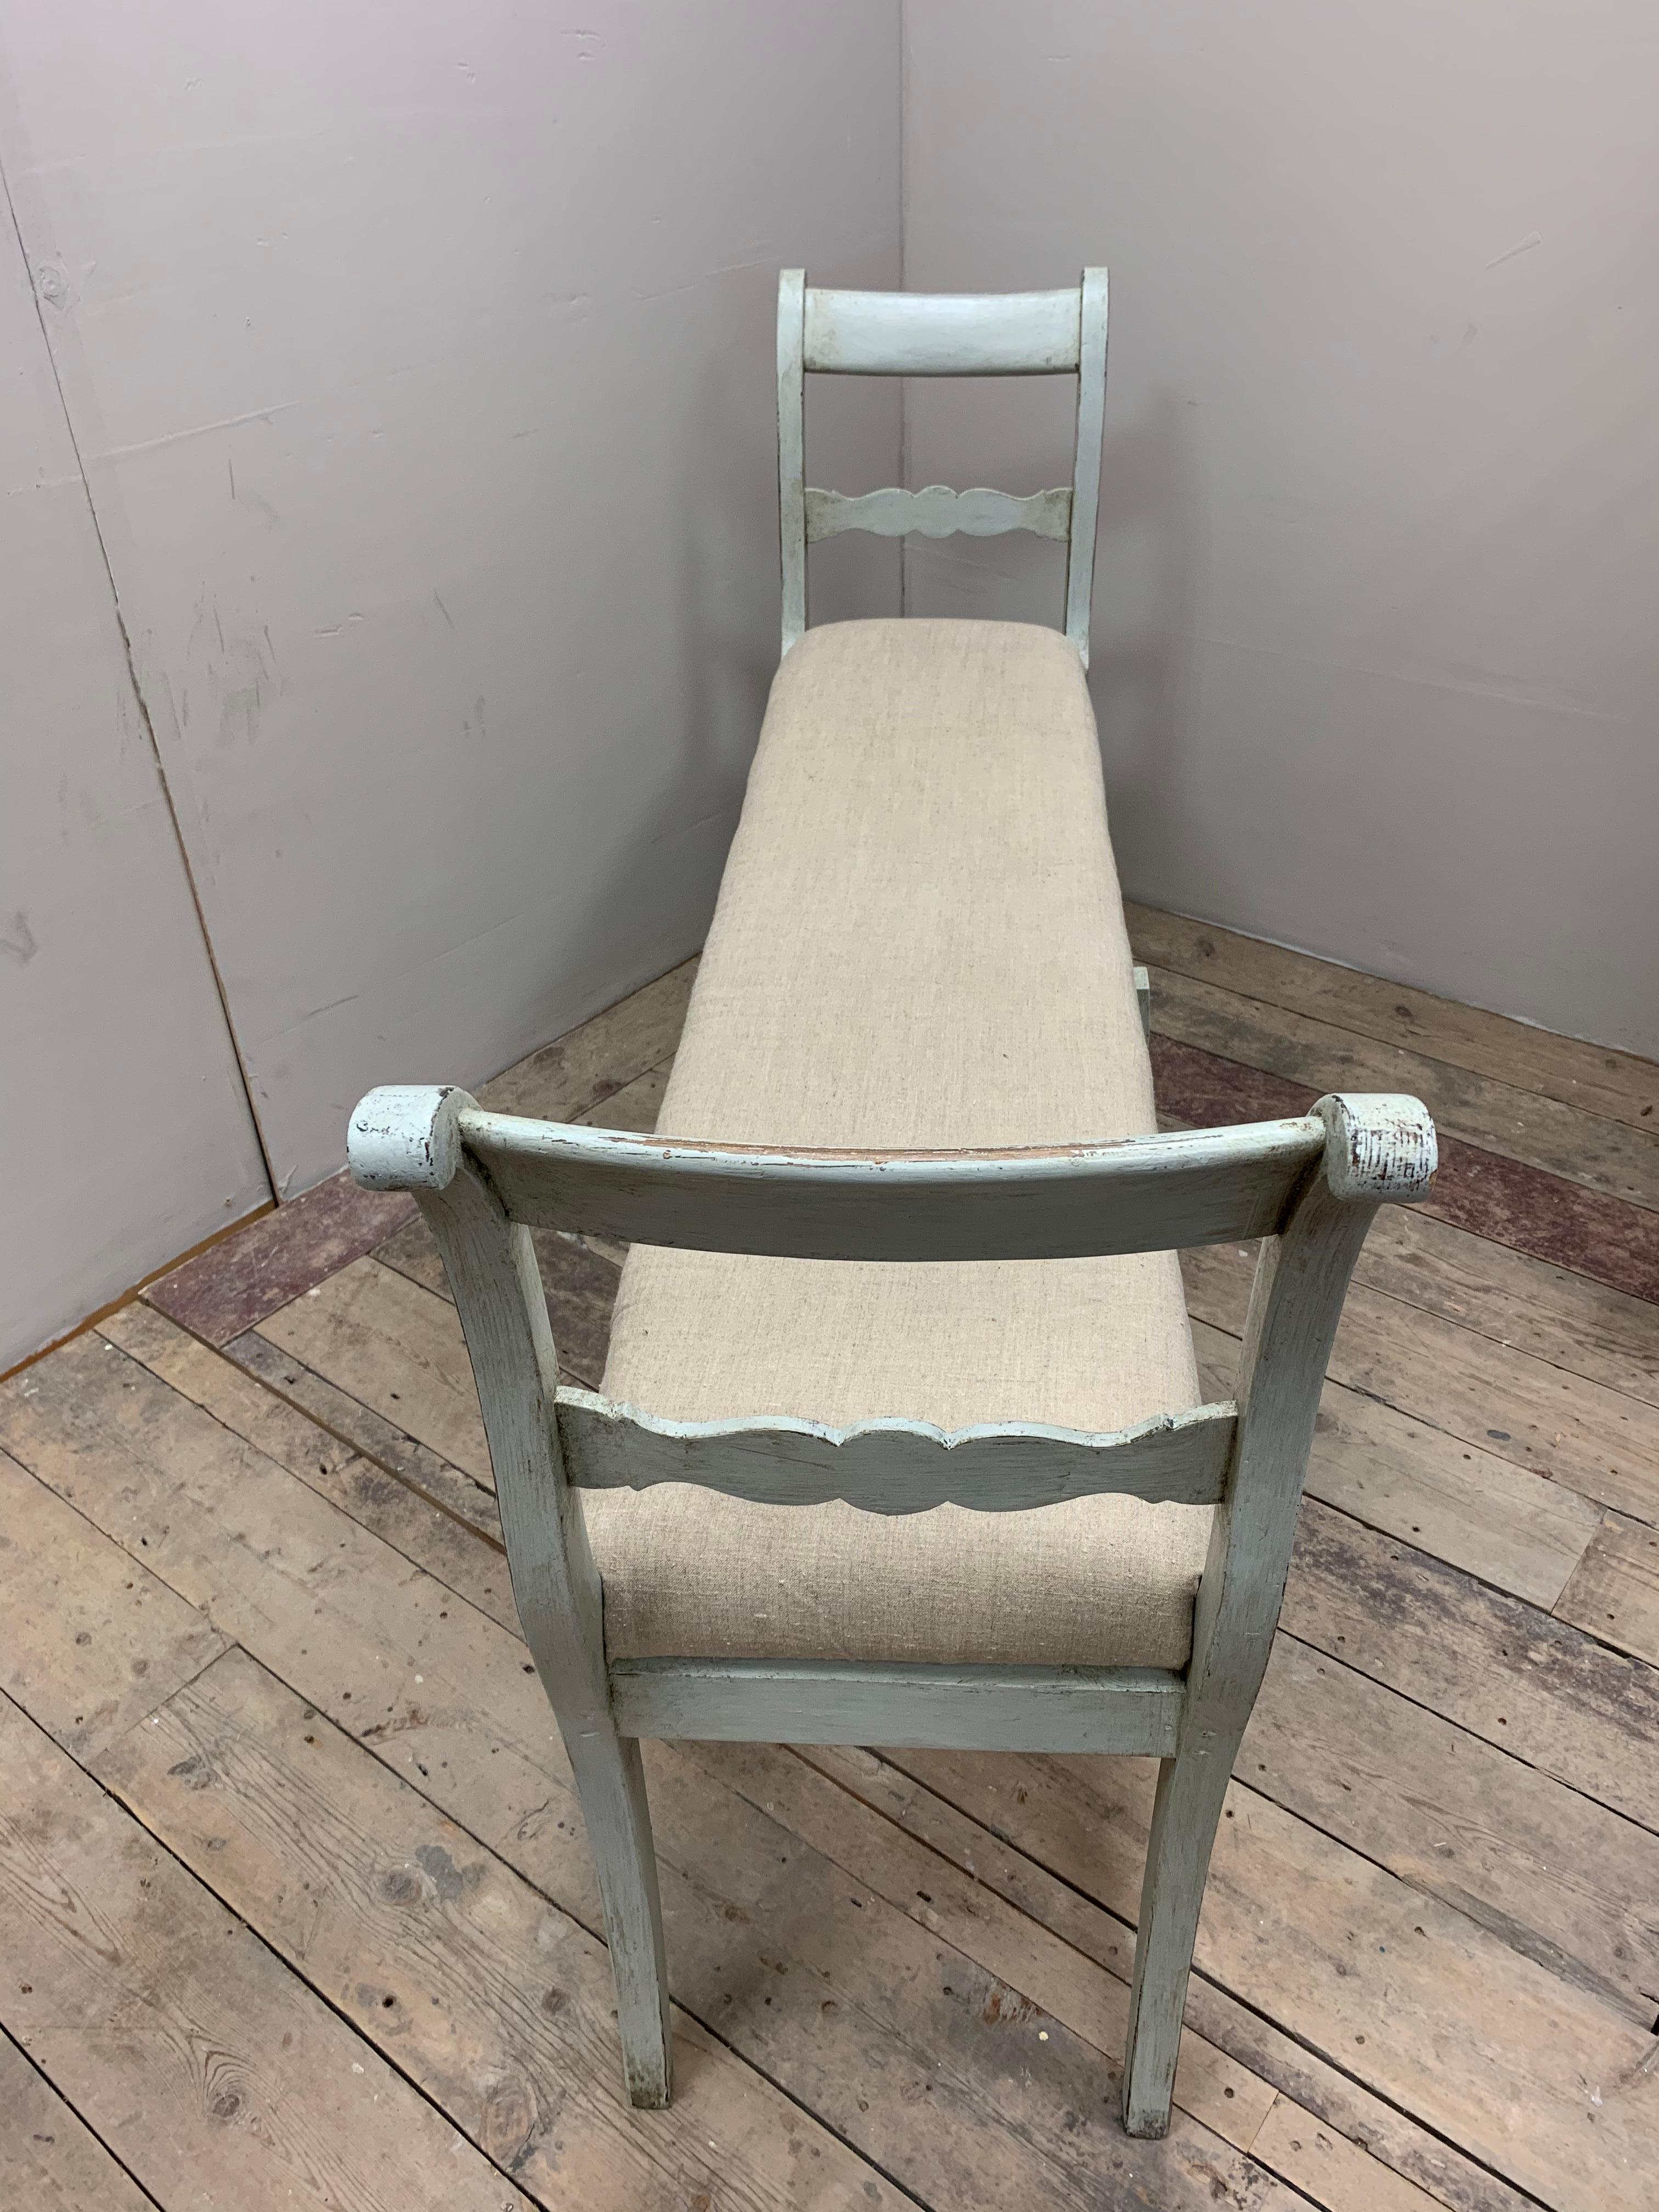 Early 20th Century Circa 1900 Painted Pale Green/Blue Swedish Bench with an Upholstered Seat